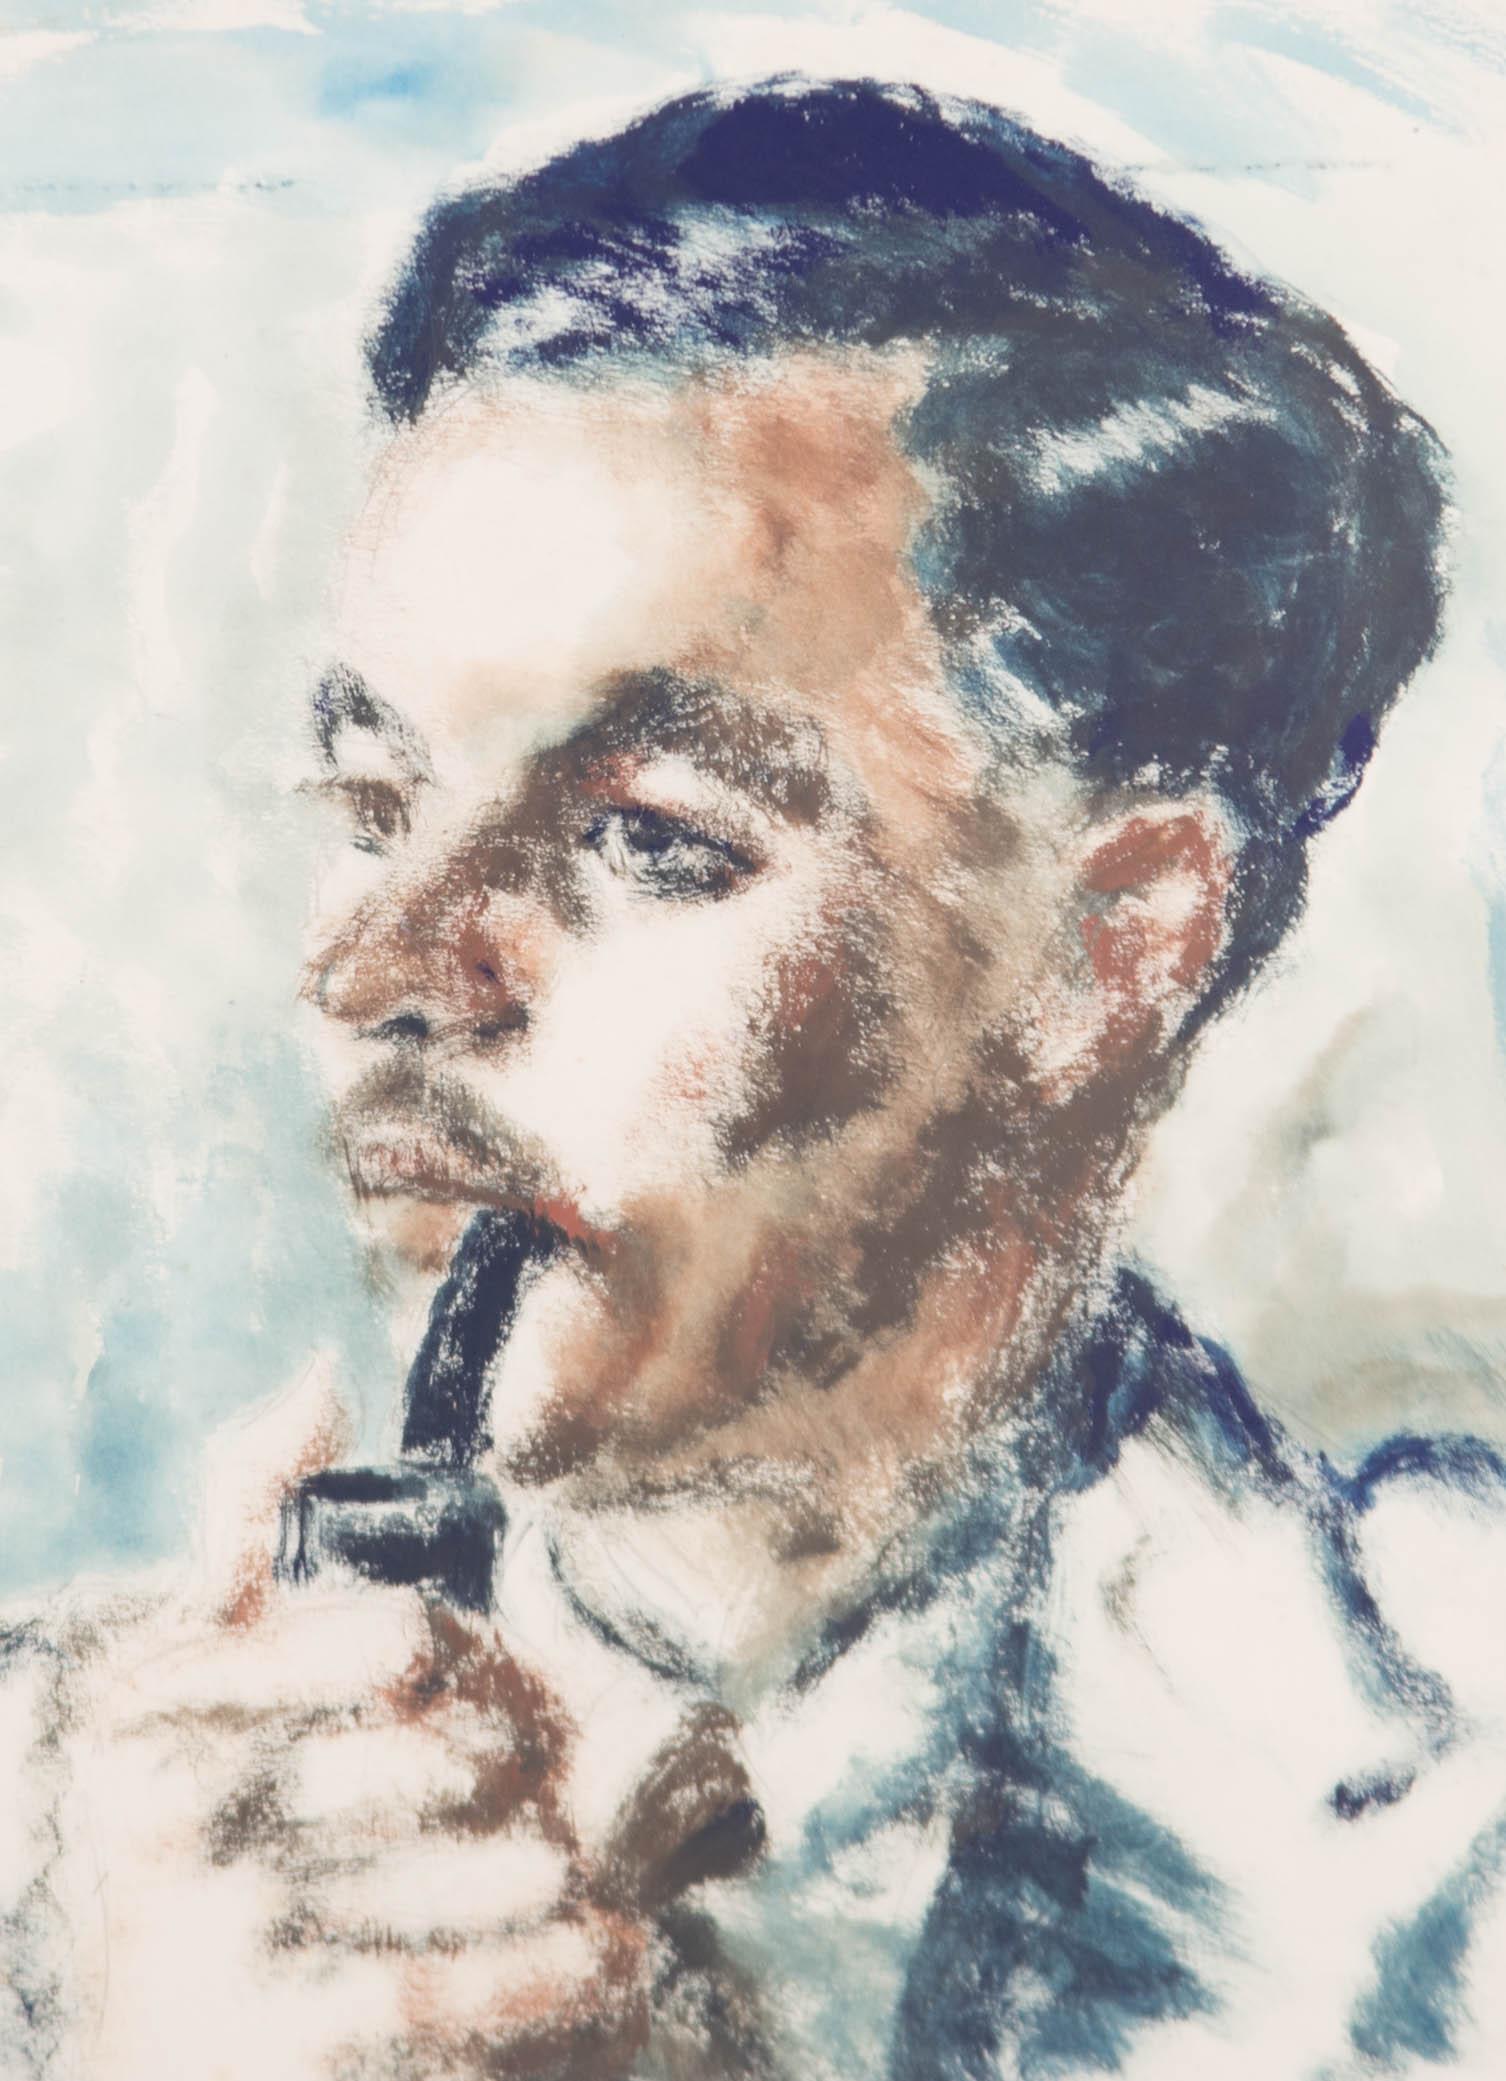 An accomplished portrait in an unusual style of dry brush worked gouache over graphite underdrawing finished with watercolour wash. The painting shows a portrait of a young man smoking a pipe. The artist shows a deft hand with such a bold technique